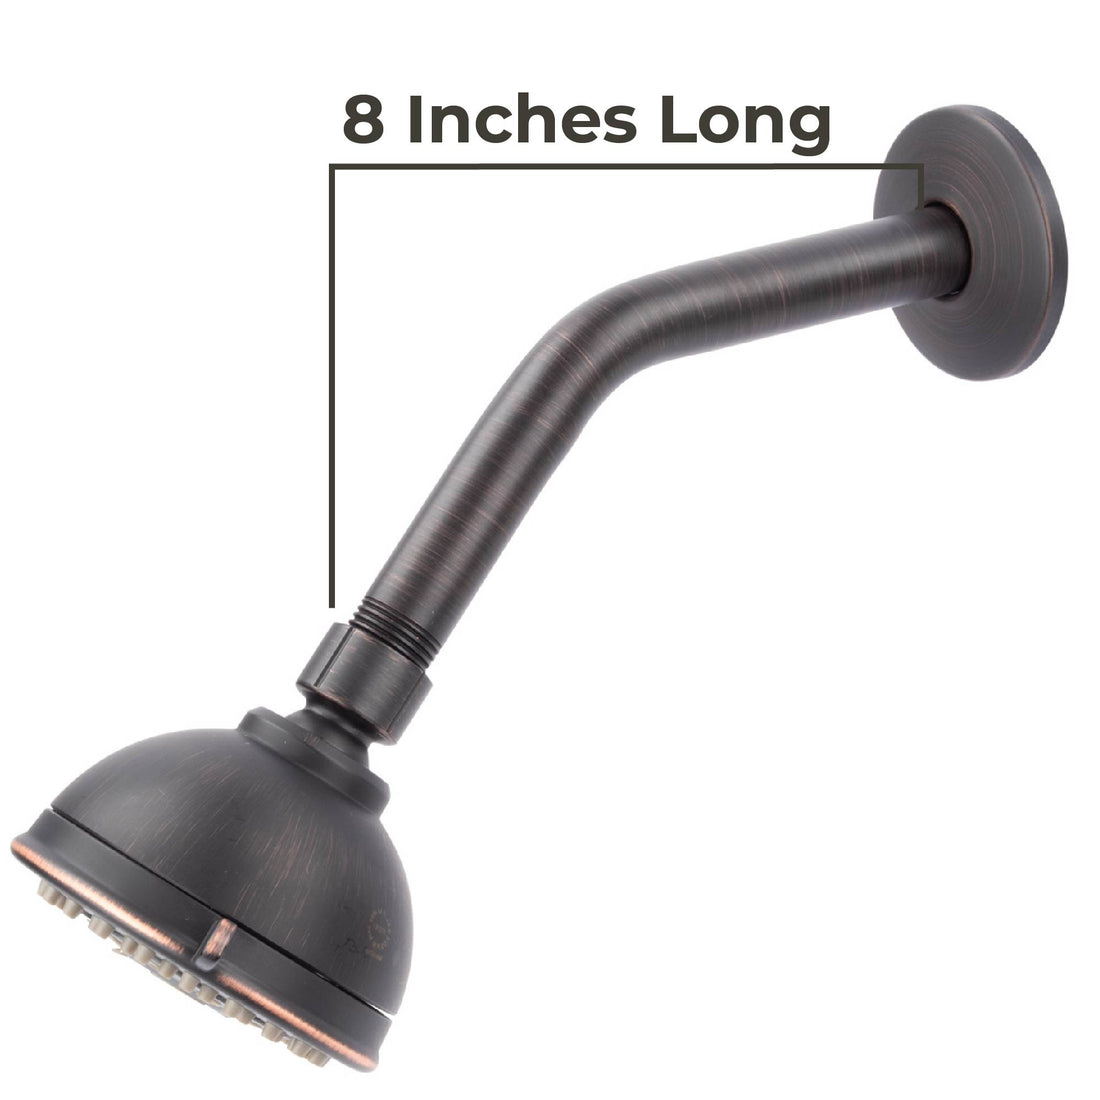 8 in. Stainless Steel Shower Head Extension Arm with Flange (Oil-Rubbed Bronze Finish) - Utility sinks vanites Tehila